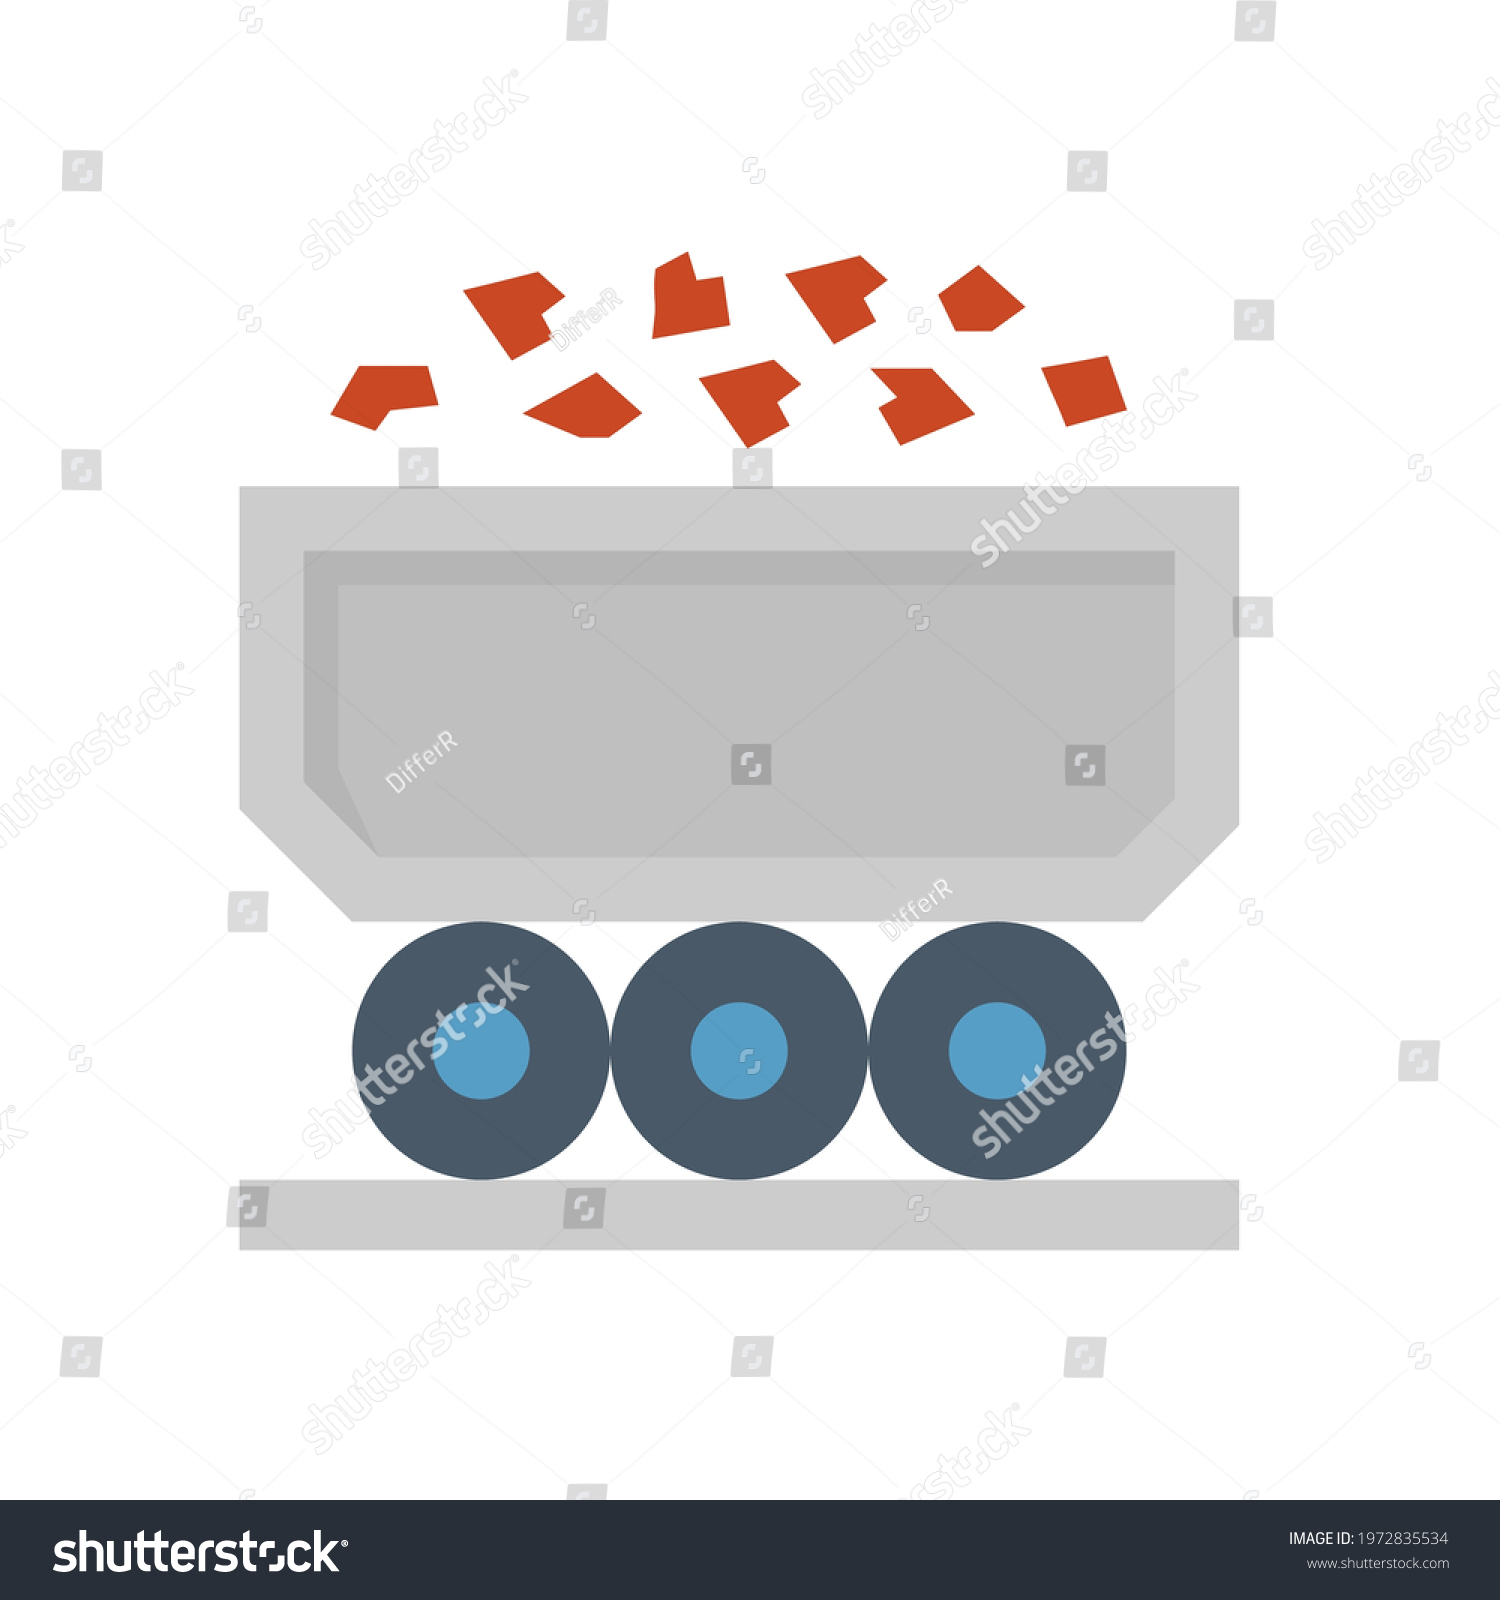 SVG of Rail freight transport vector icon. Also called goods wagons or freight wagons. Consist of bulk trolley or cart with goods, cargo or material from mine i.e. iron ore, coal, rock, mineral or gold. svg